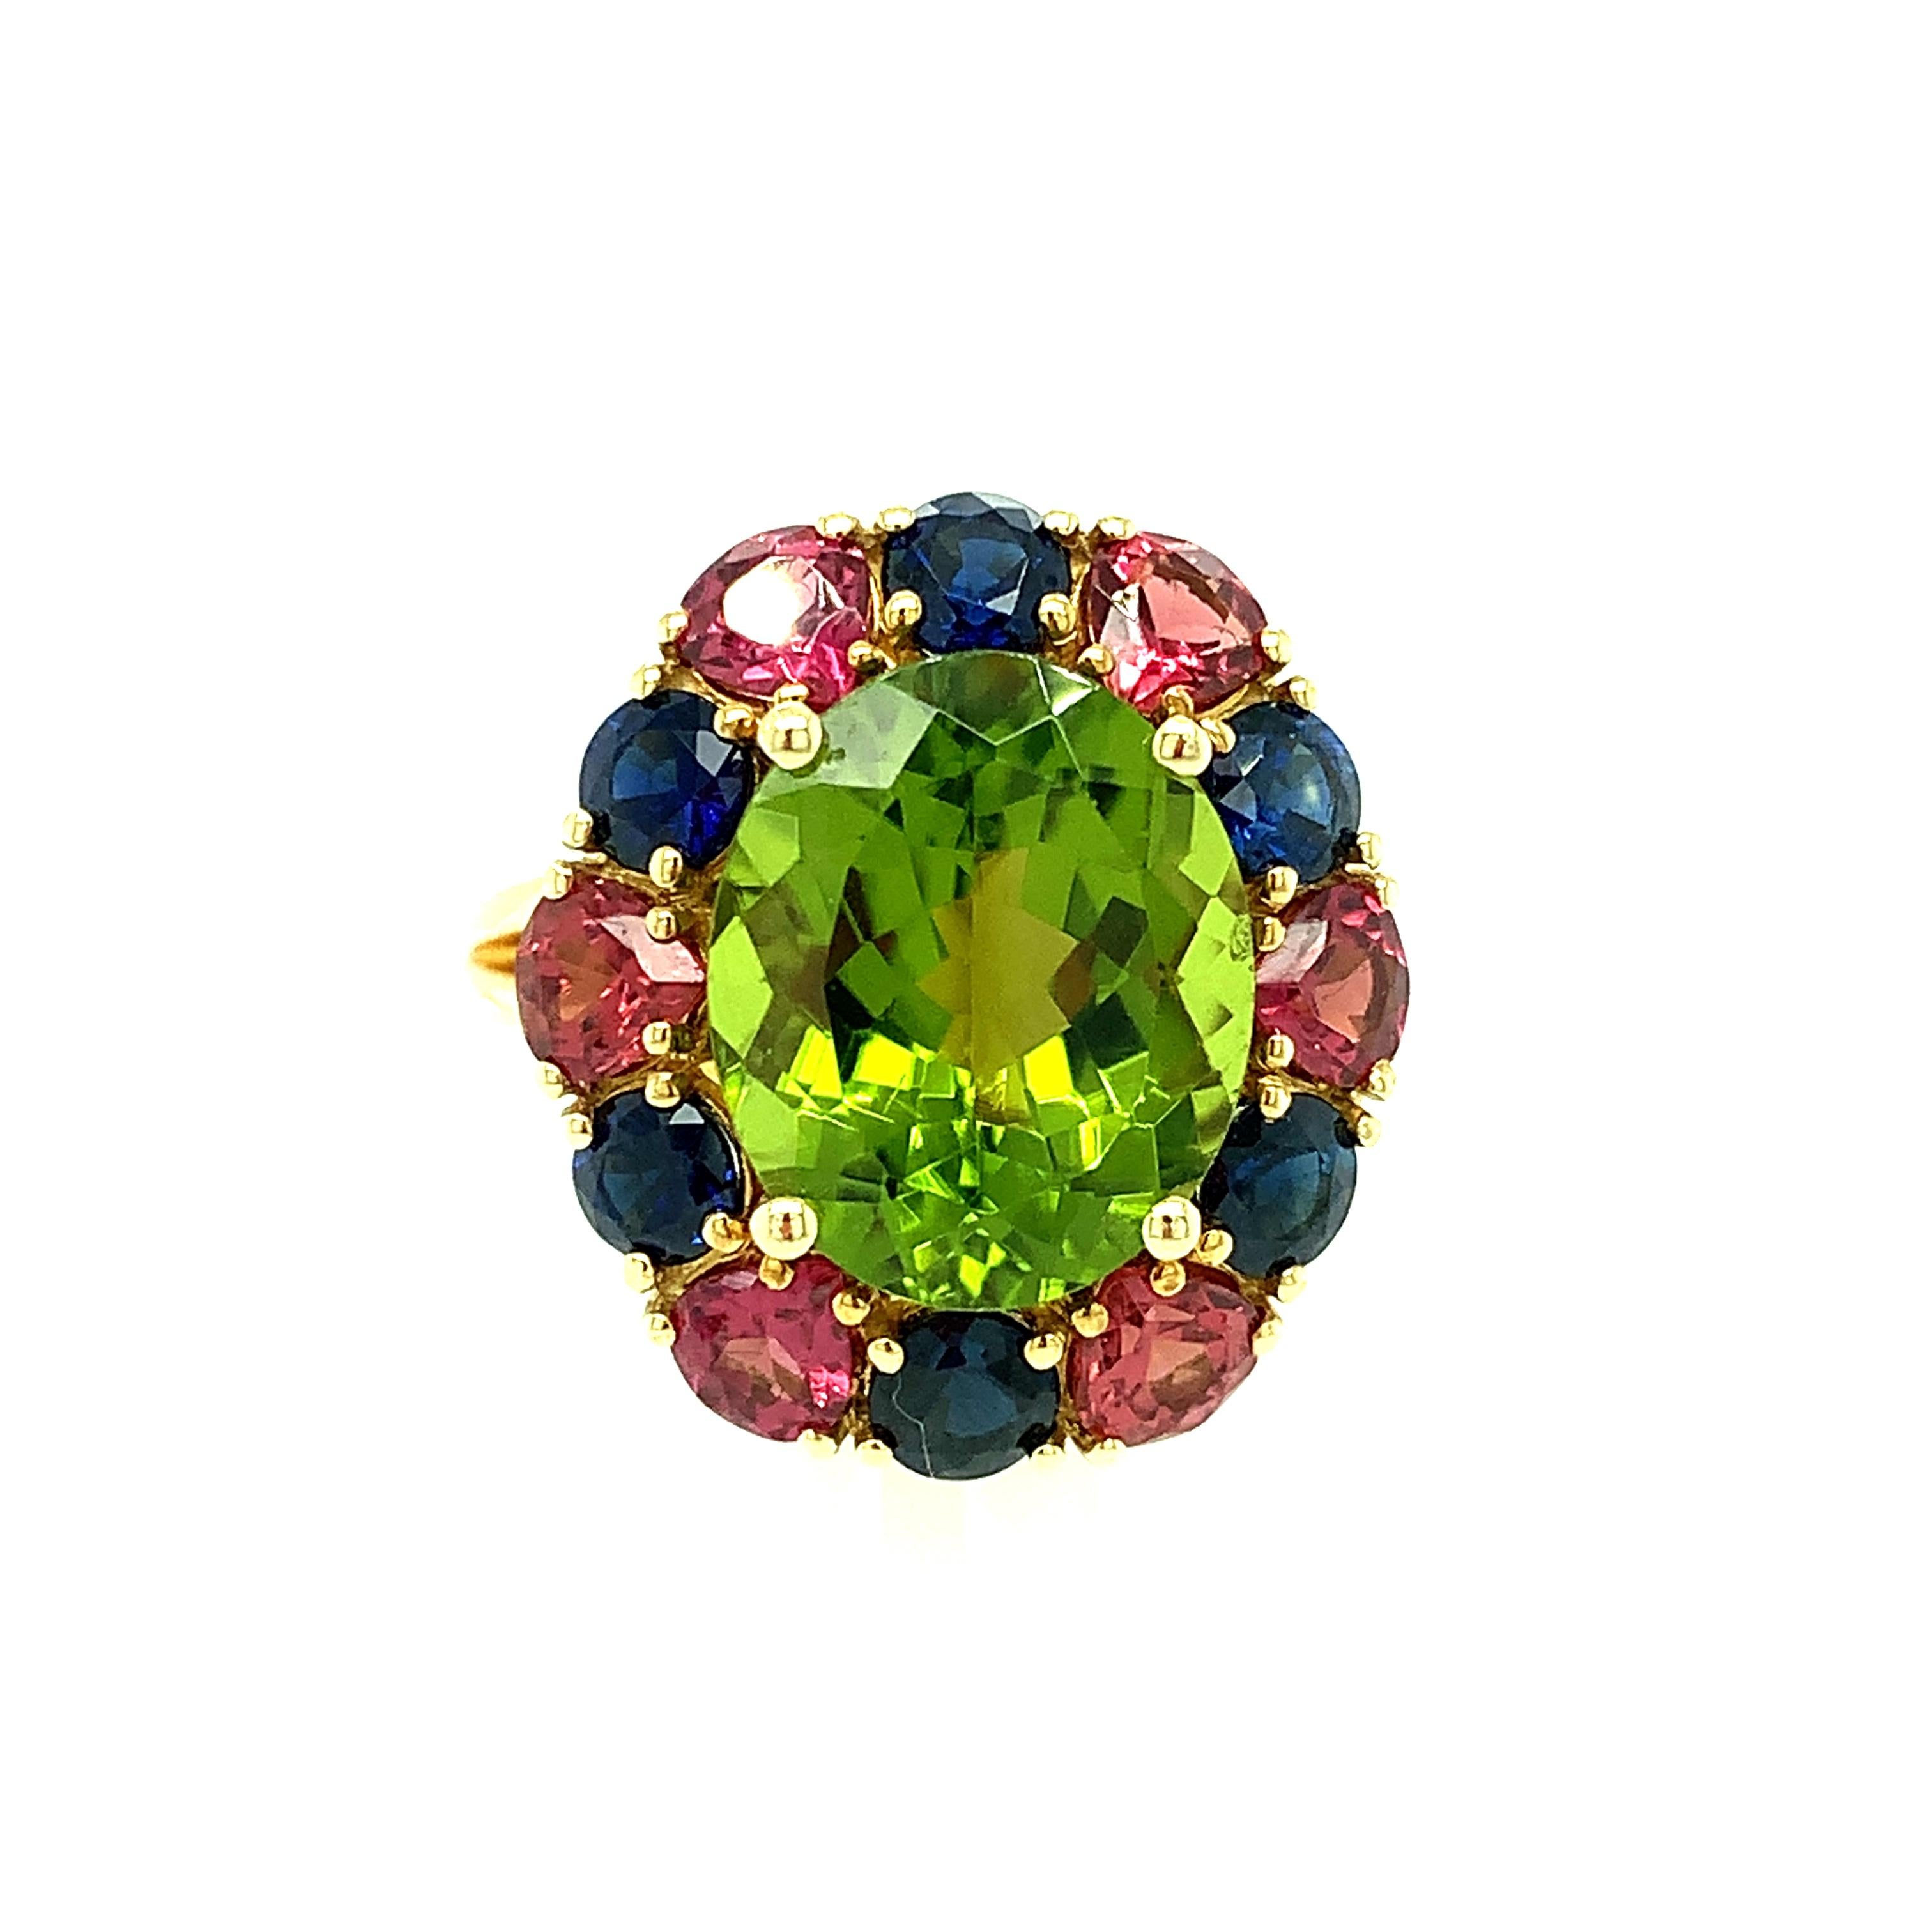 This stunning 18k yellow gold cocktail ring features a velvety, 6.70 carat citrus-green peridot surrounded by a halo of royal blue sapphires and rose colored garnets. Our company was one of the first to combine colors that had rarely been seen